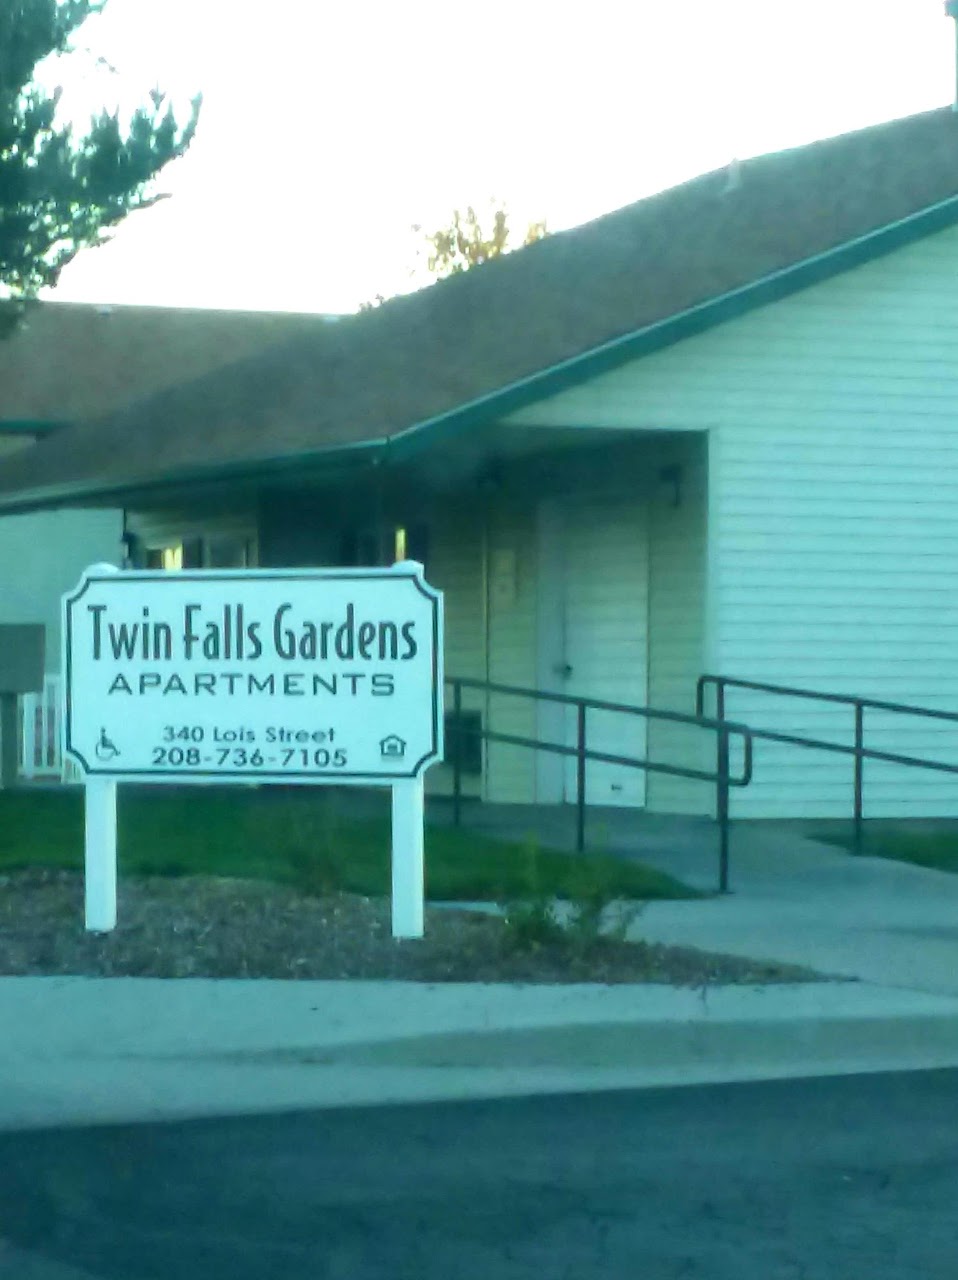 Photo of TWIN FALLS GARDEN. Affordable housing located at 340 LOIS STREET TWIN FALLS, ID 83301